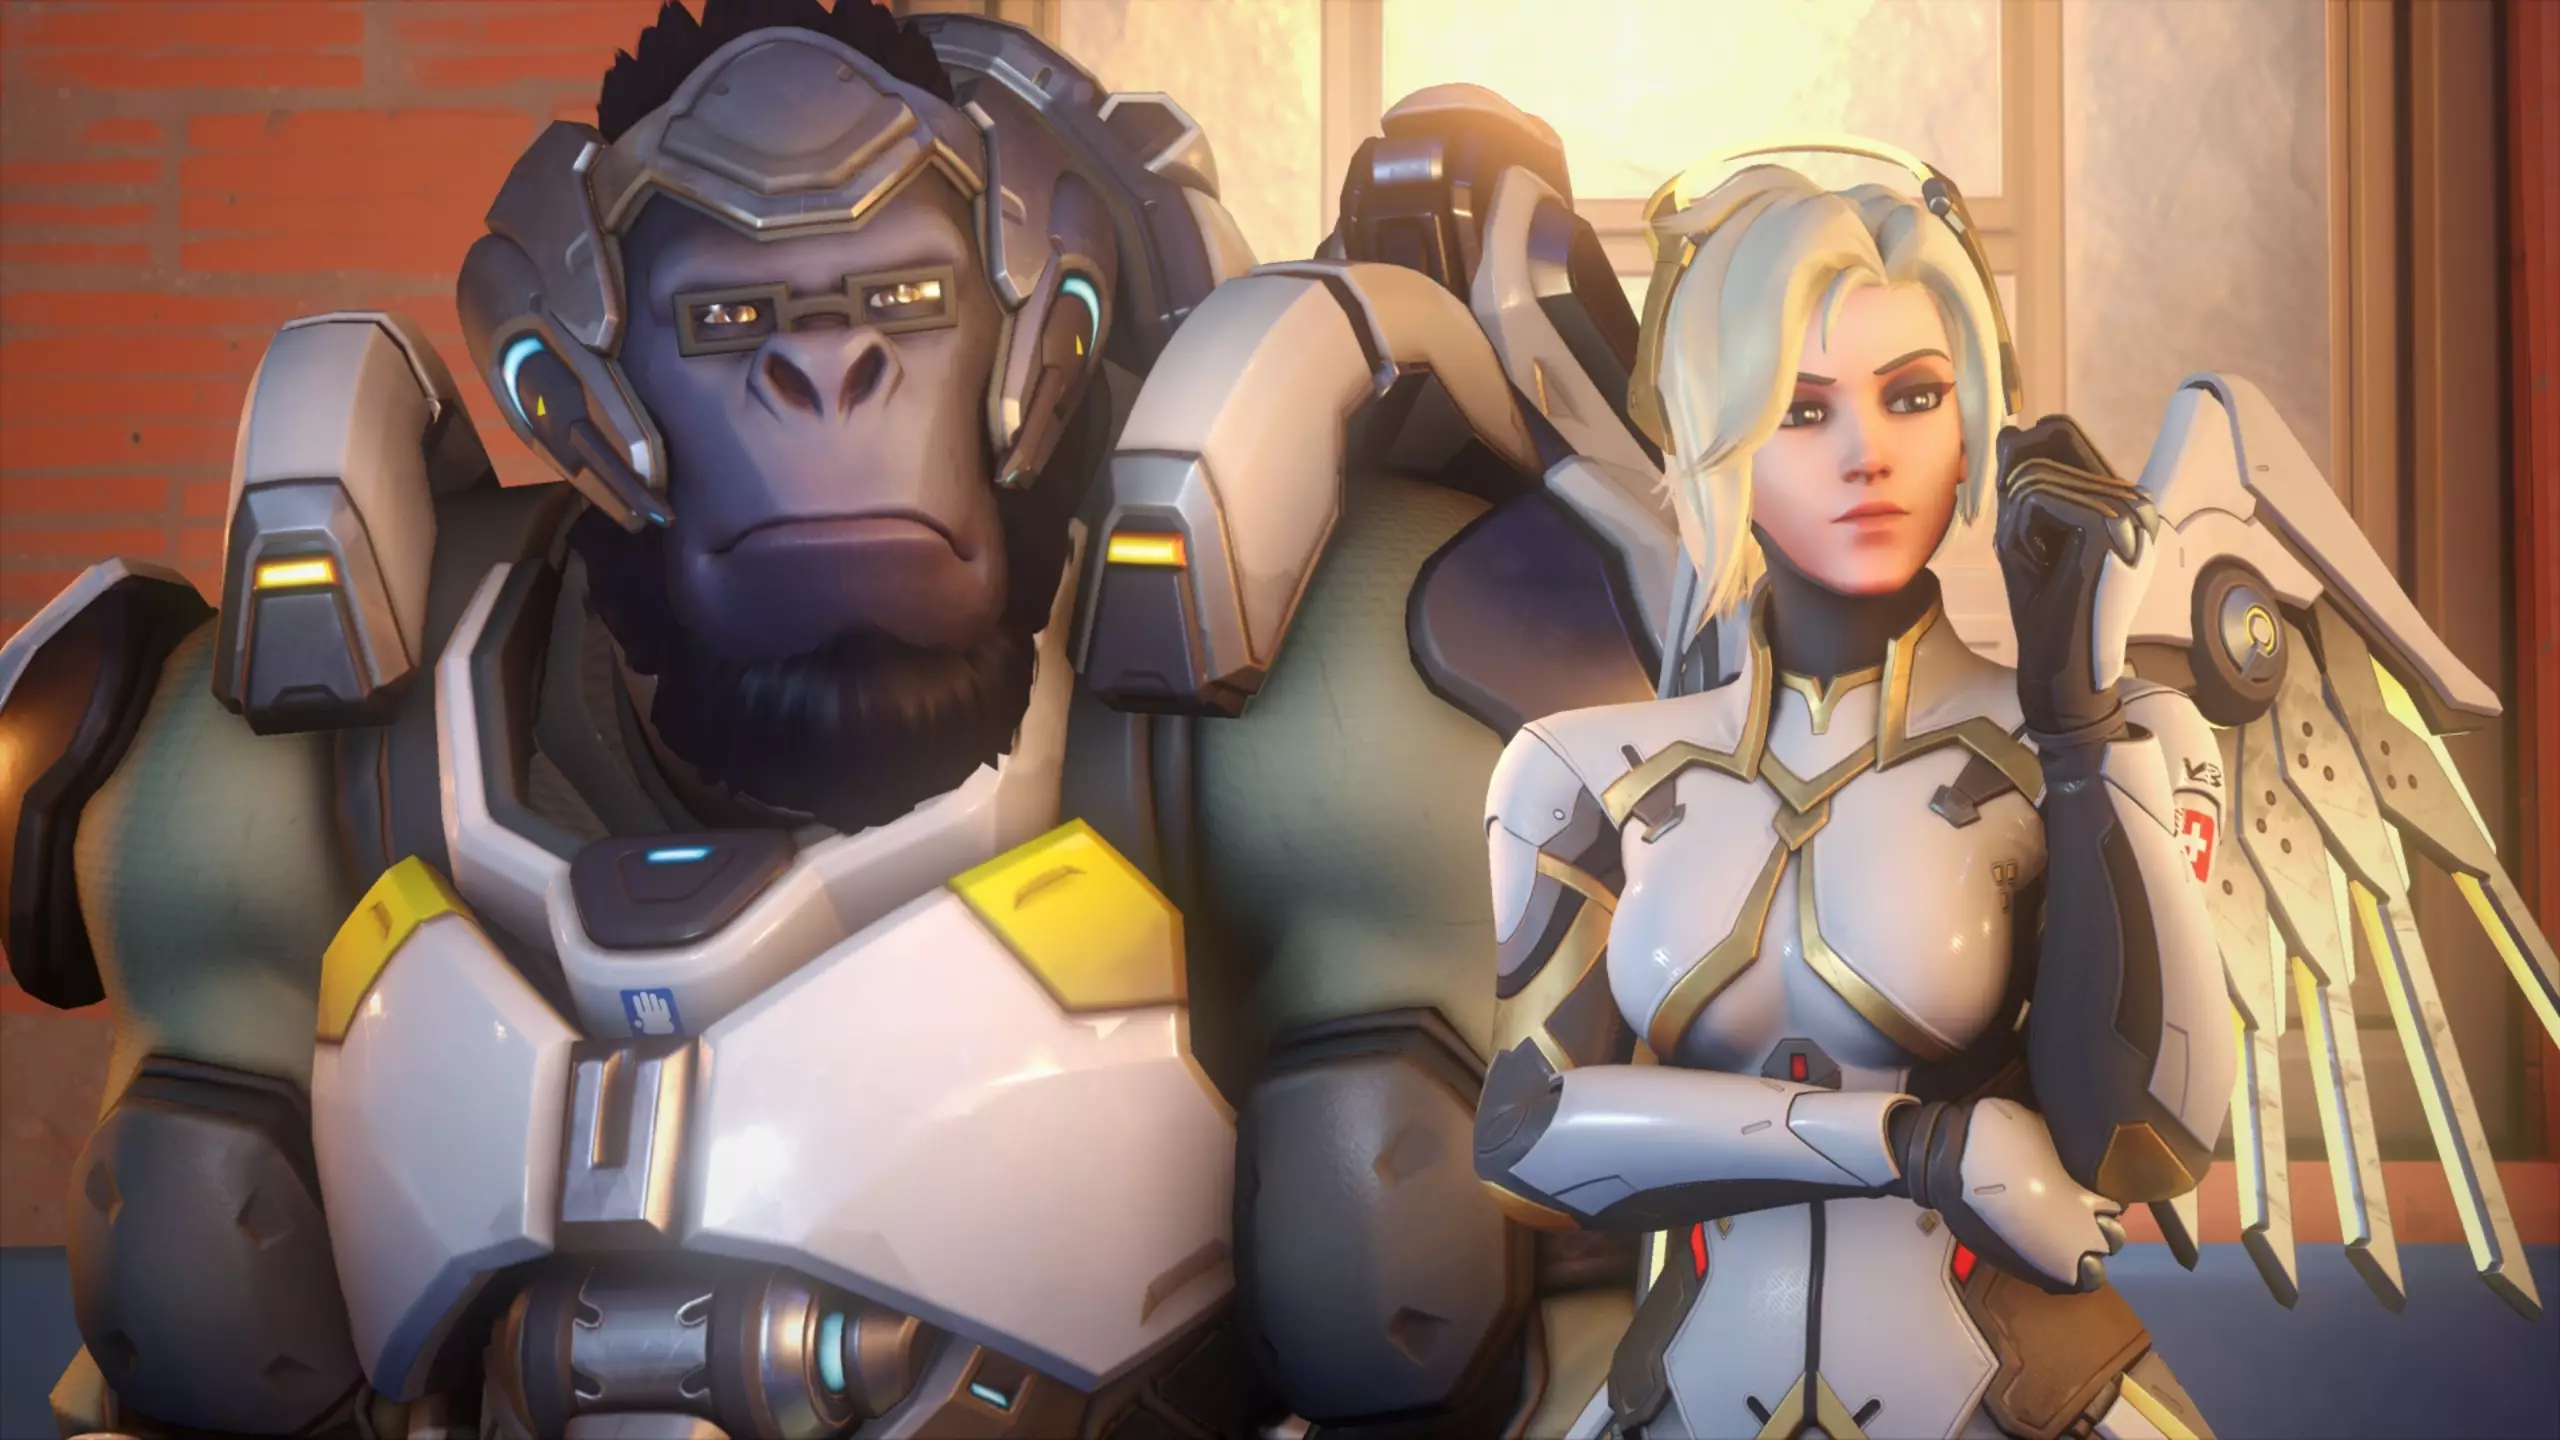 All the Overwatch characters are returning for the sequel